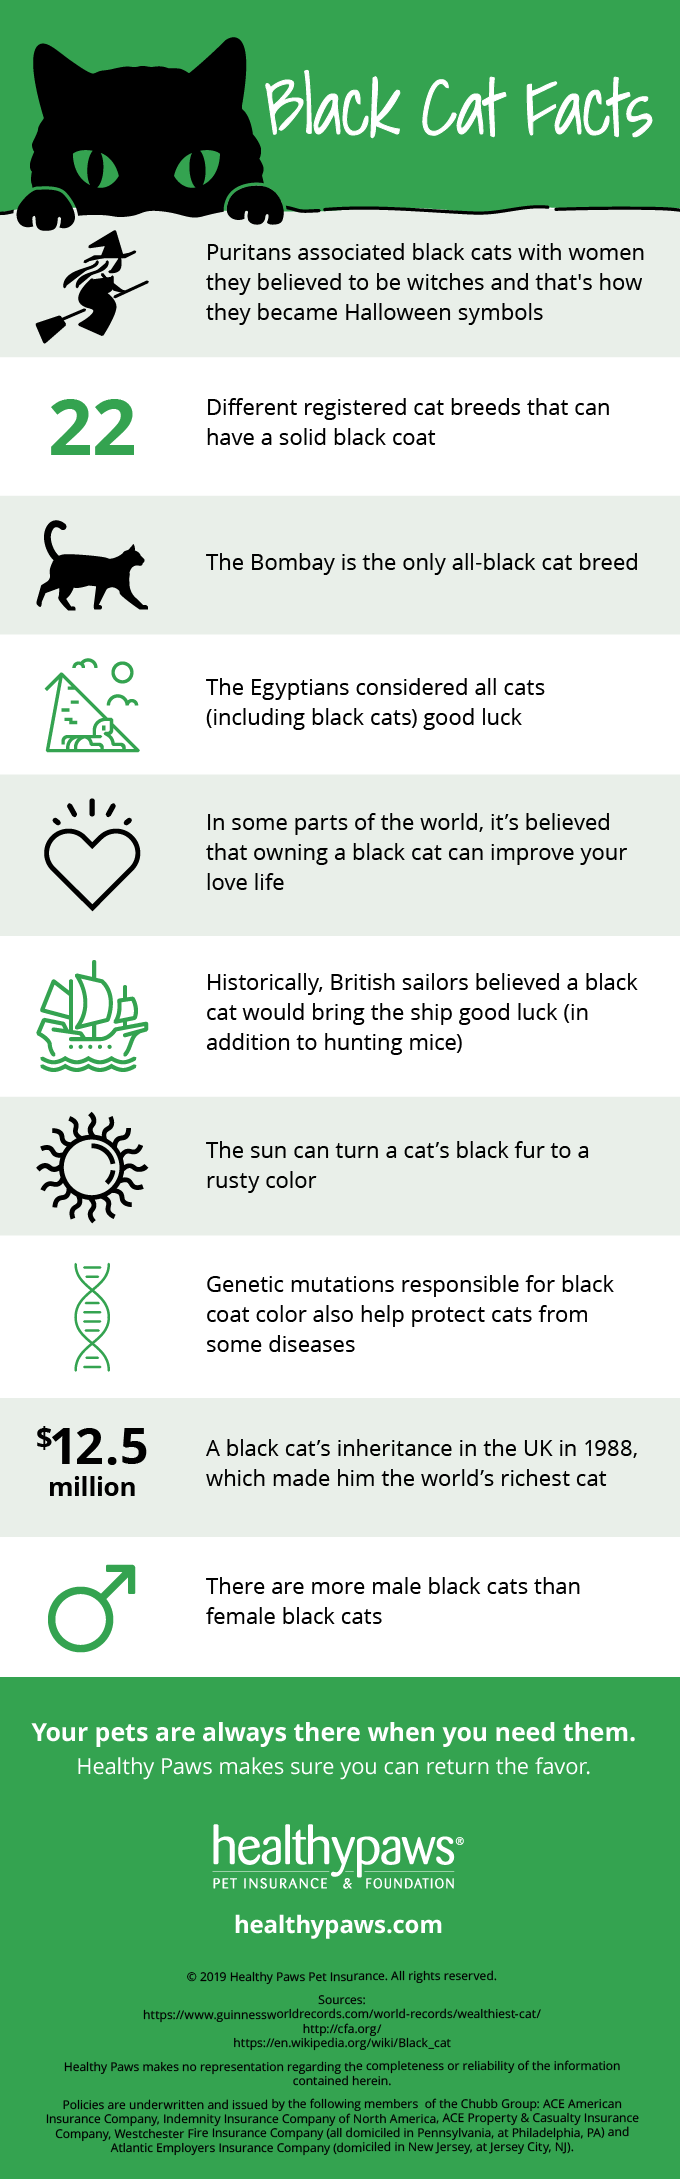 black cat facts infographic